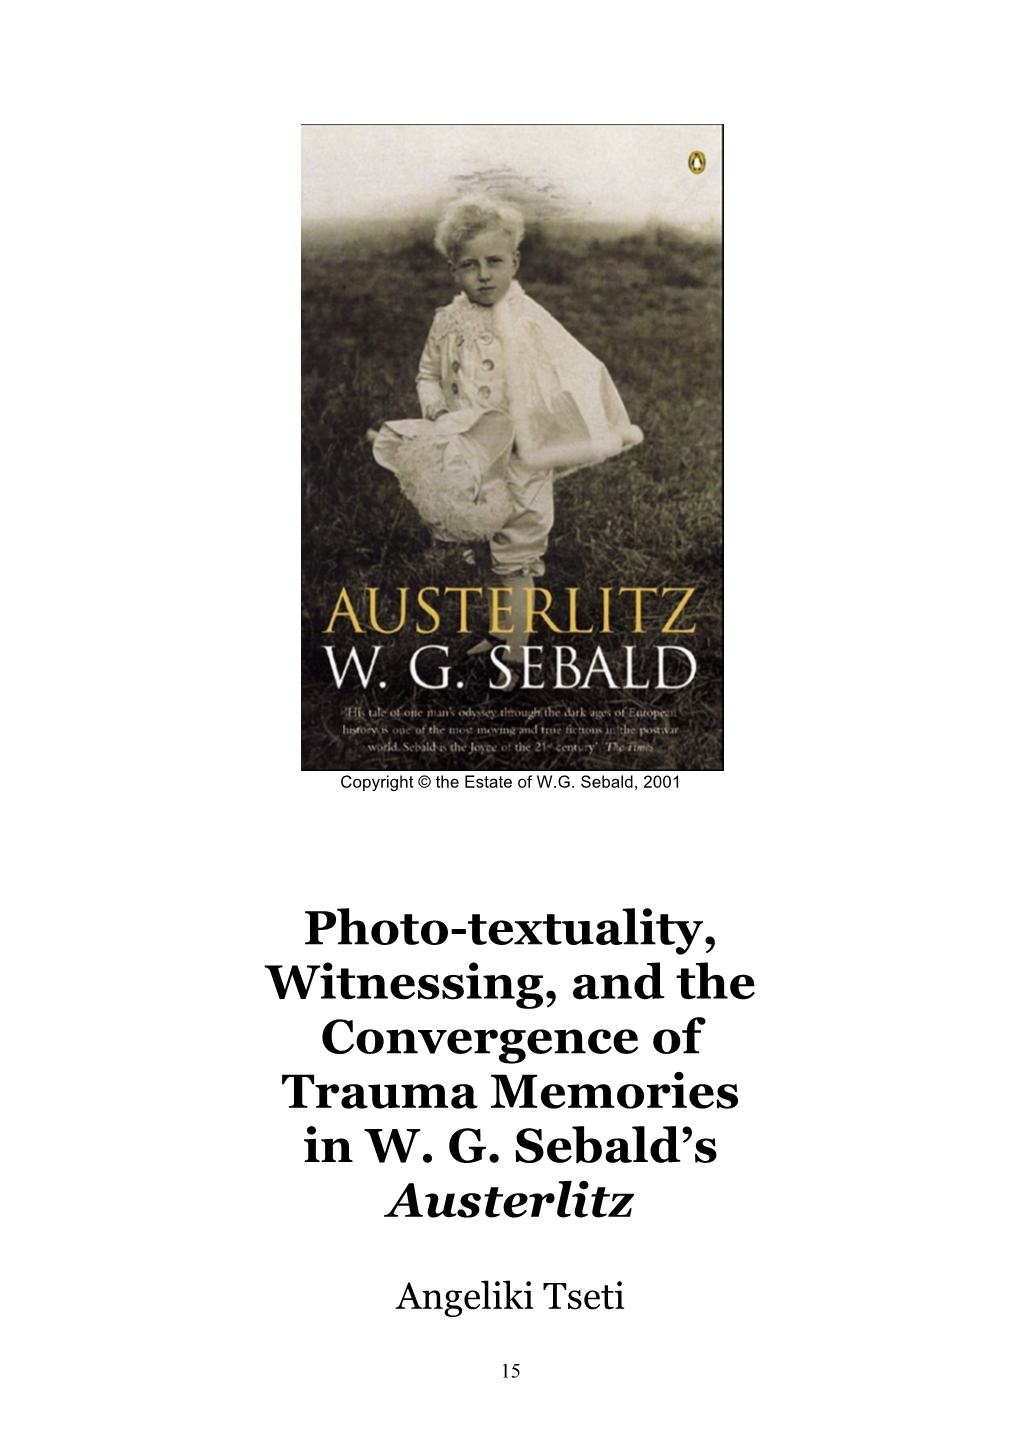 Photo-Textuality, Witnessing, and the Convergence of Trauma Memories in W